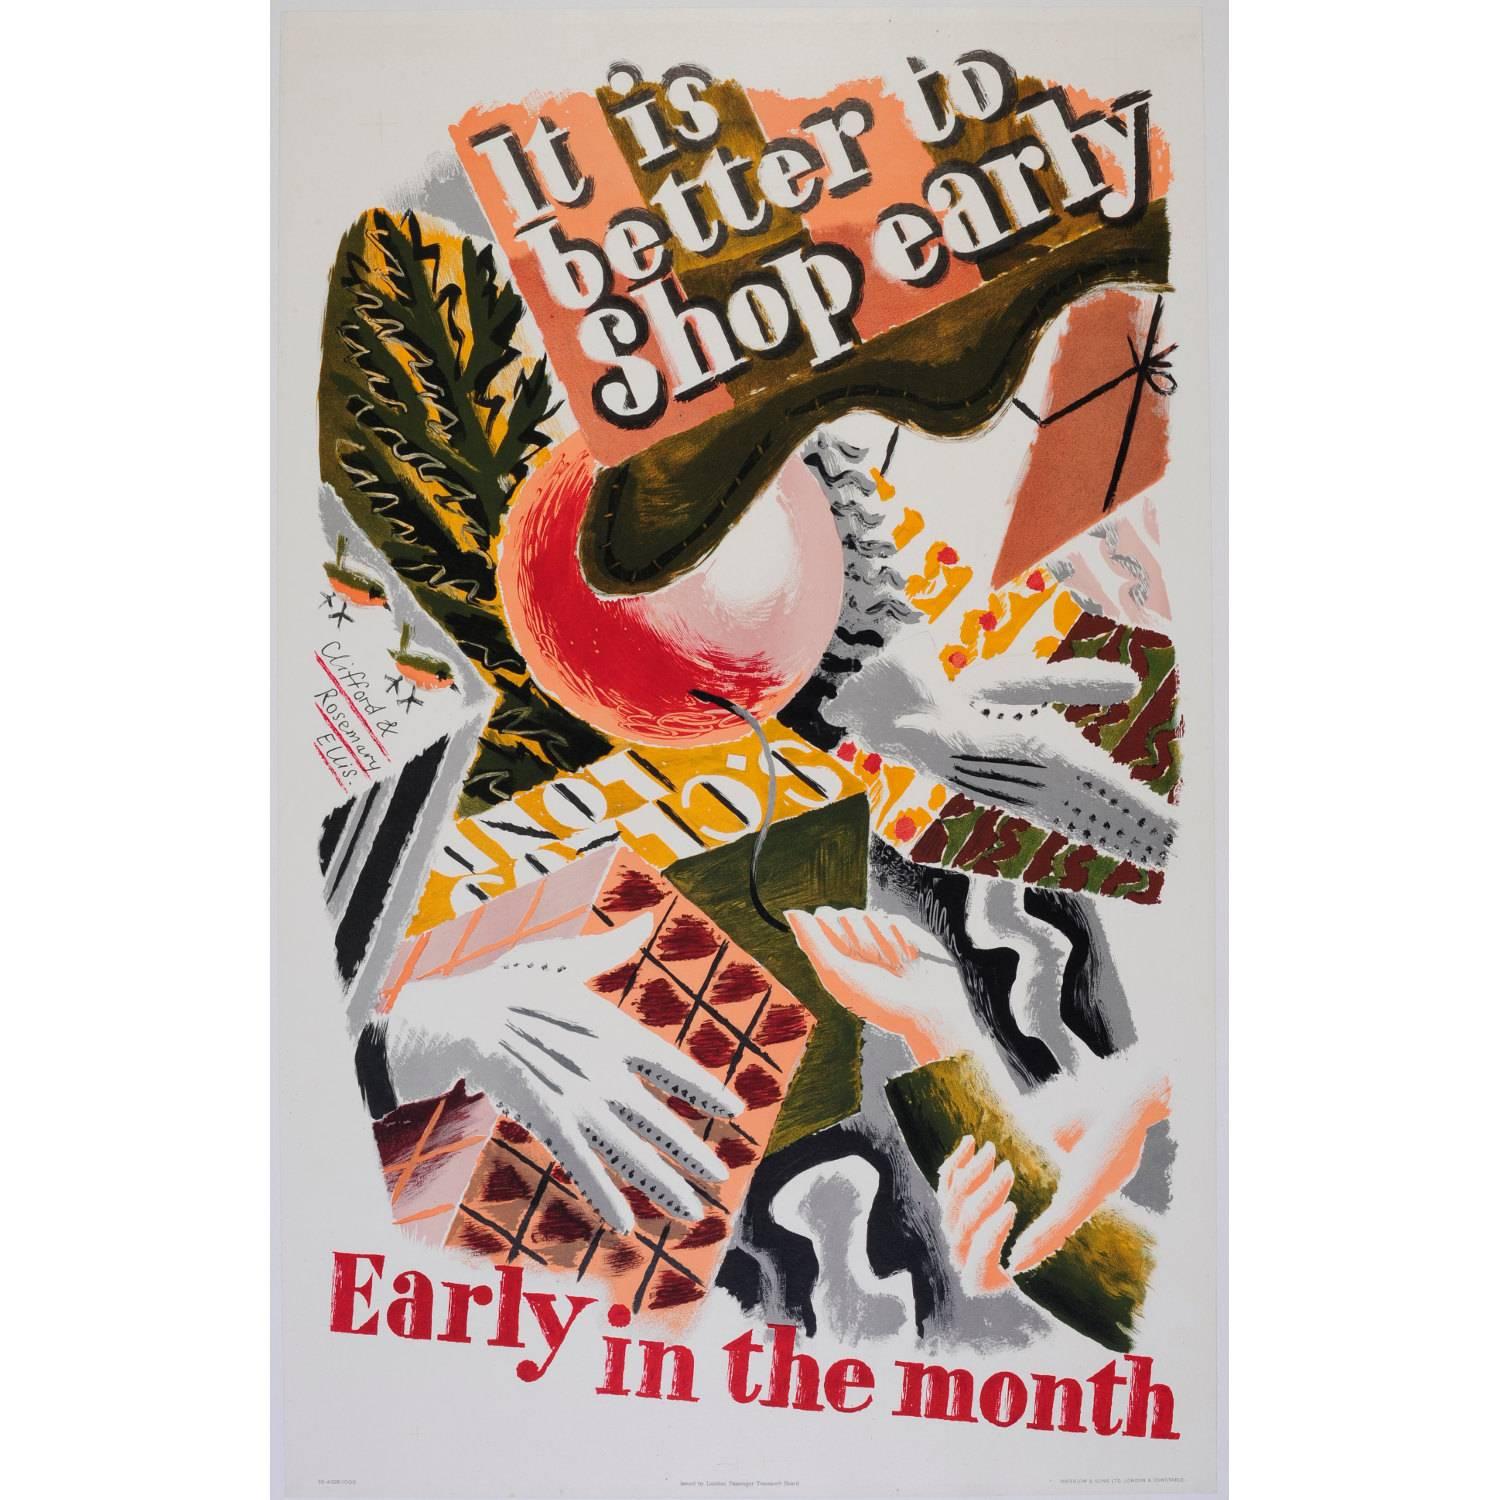 Clifford & Rosemary Ellis Print - London Transport 1935 Poster Early in the Month Clifford and Rosemary Ellis